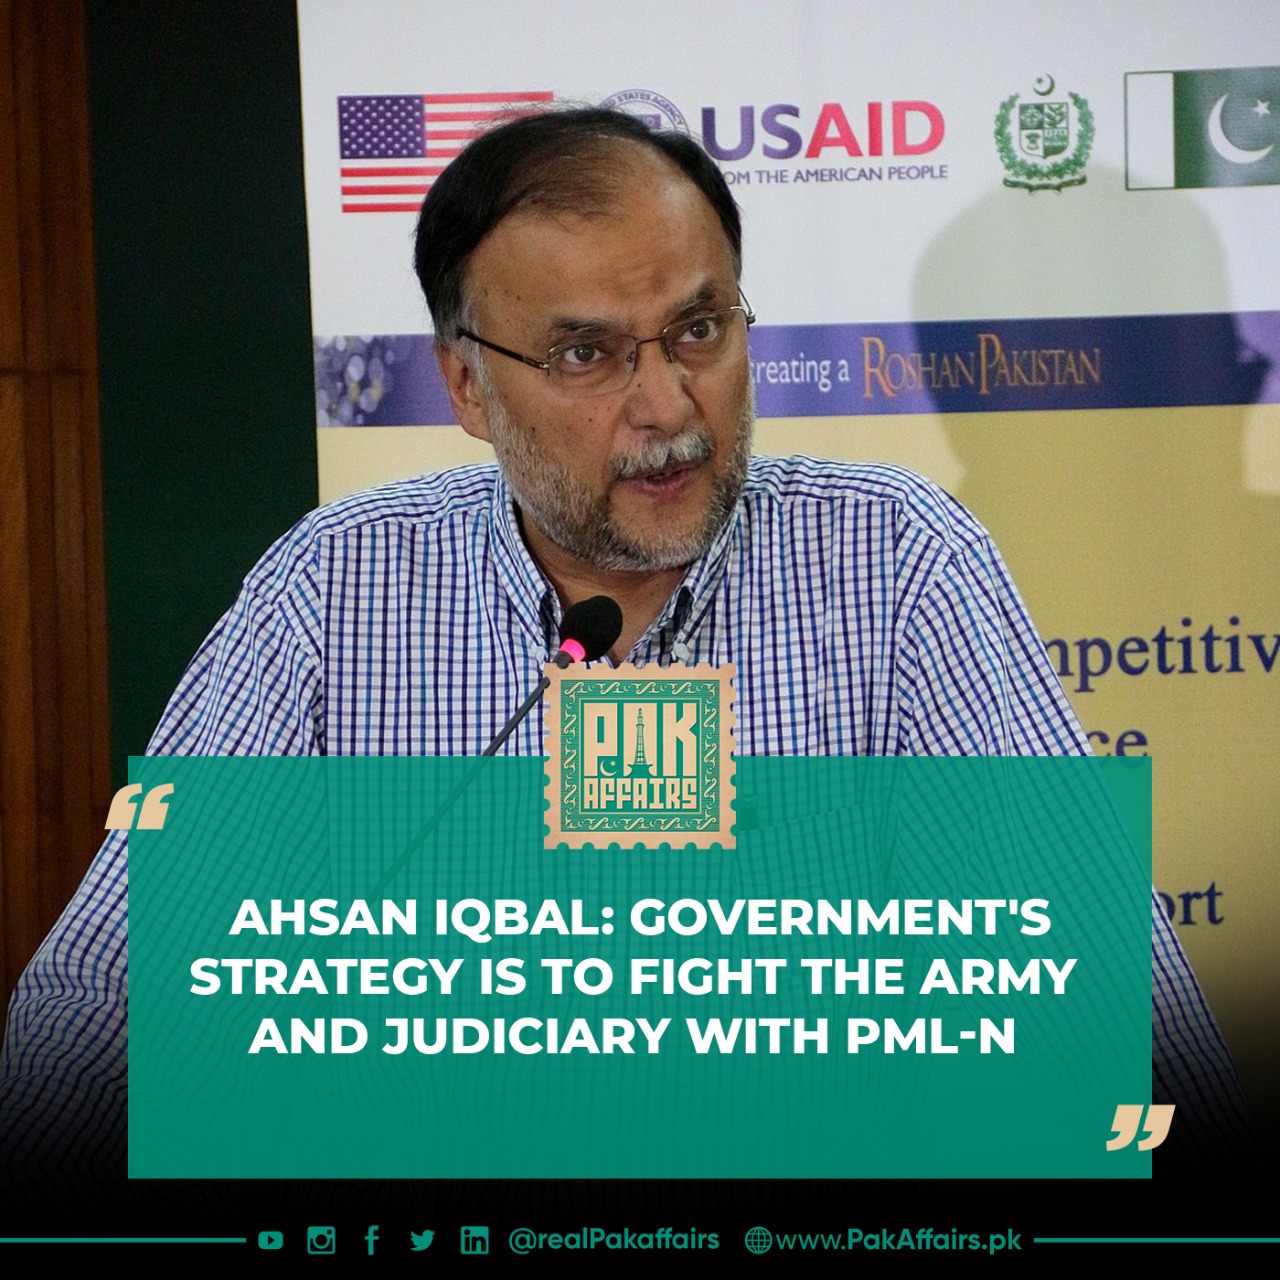 Government's strategy is to fight the army and judiciary with PML-N: Ahsan Iqbal.